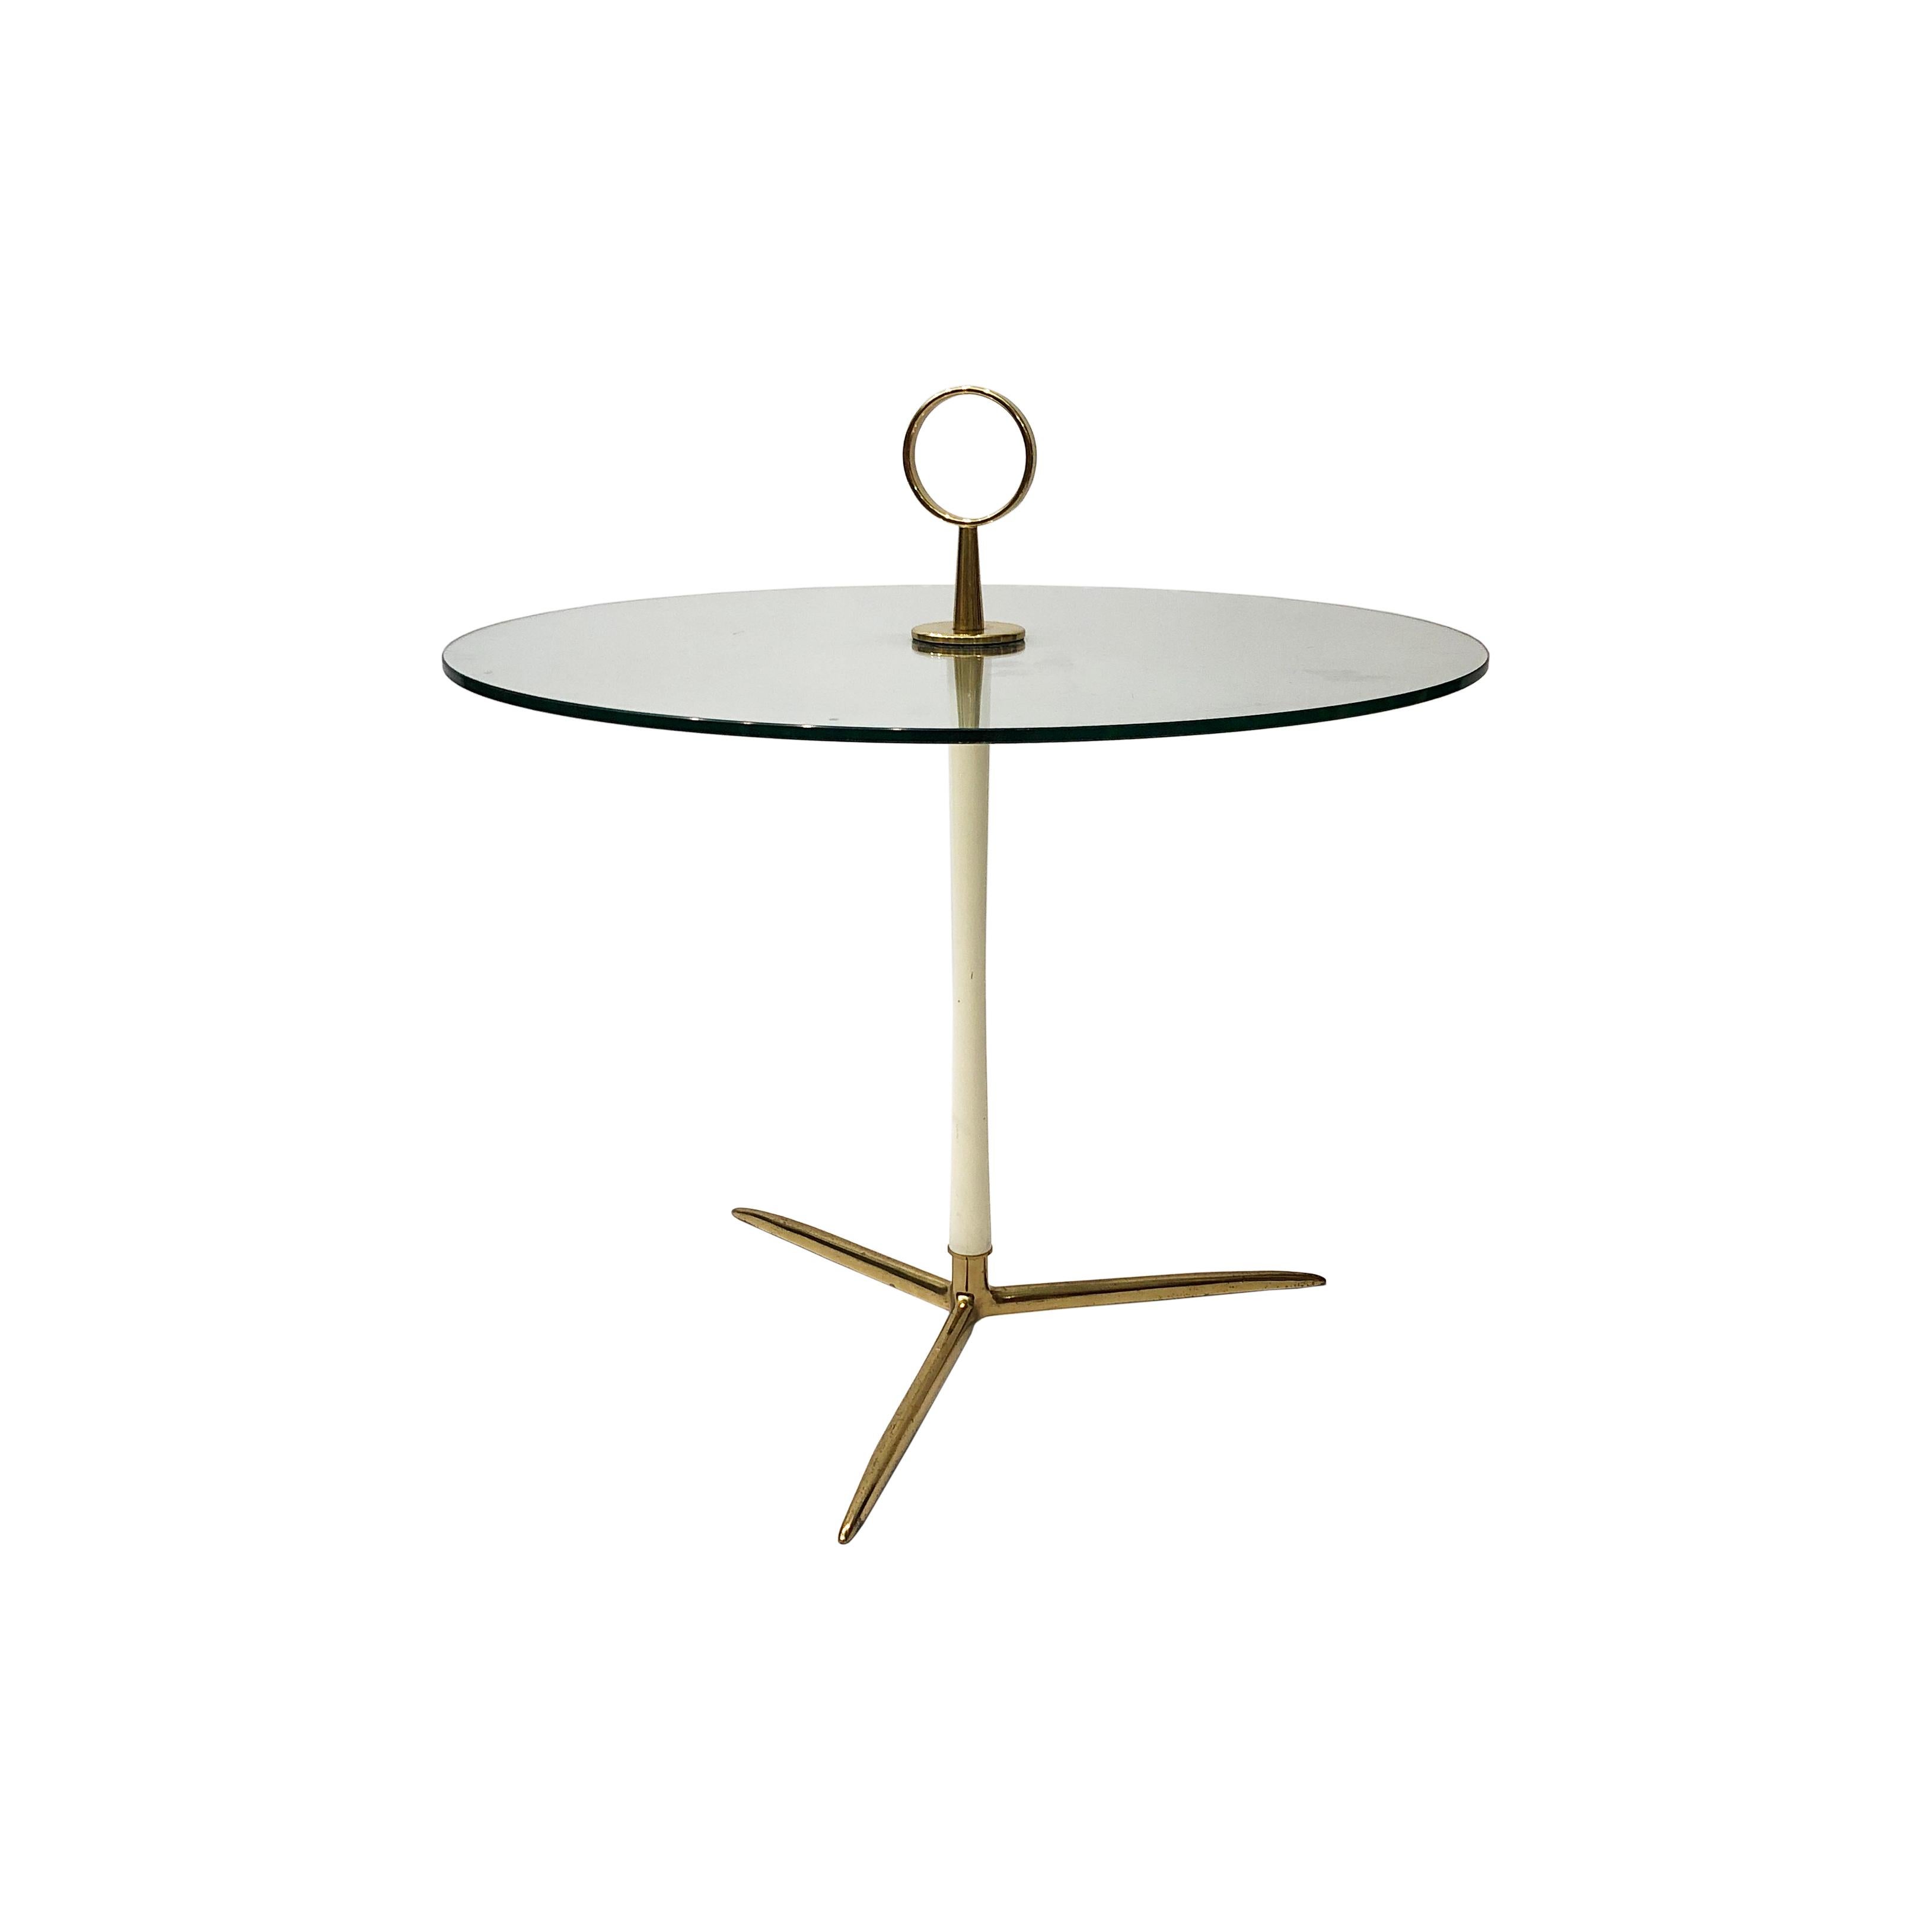 An elegant and rare Mid-Century Modern tripod side table designed and manufactured by Vereinigte Werkstätten, in 1950s Germany.

This side table stands on a brass tripod base where a central powdered coated rod in fine hourglass shape is joined on